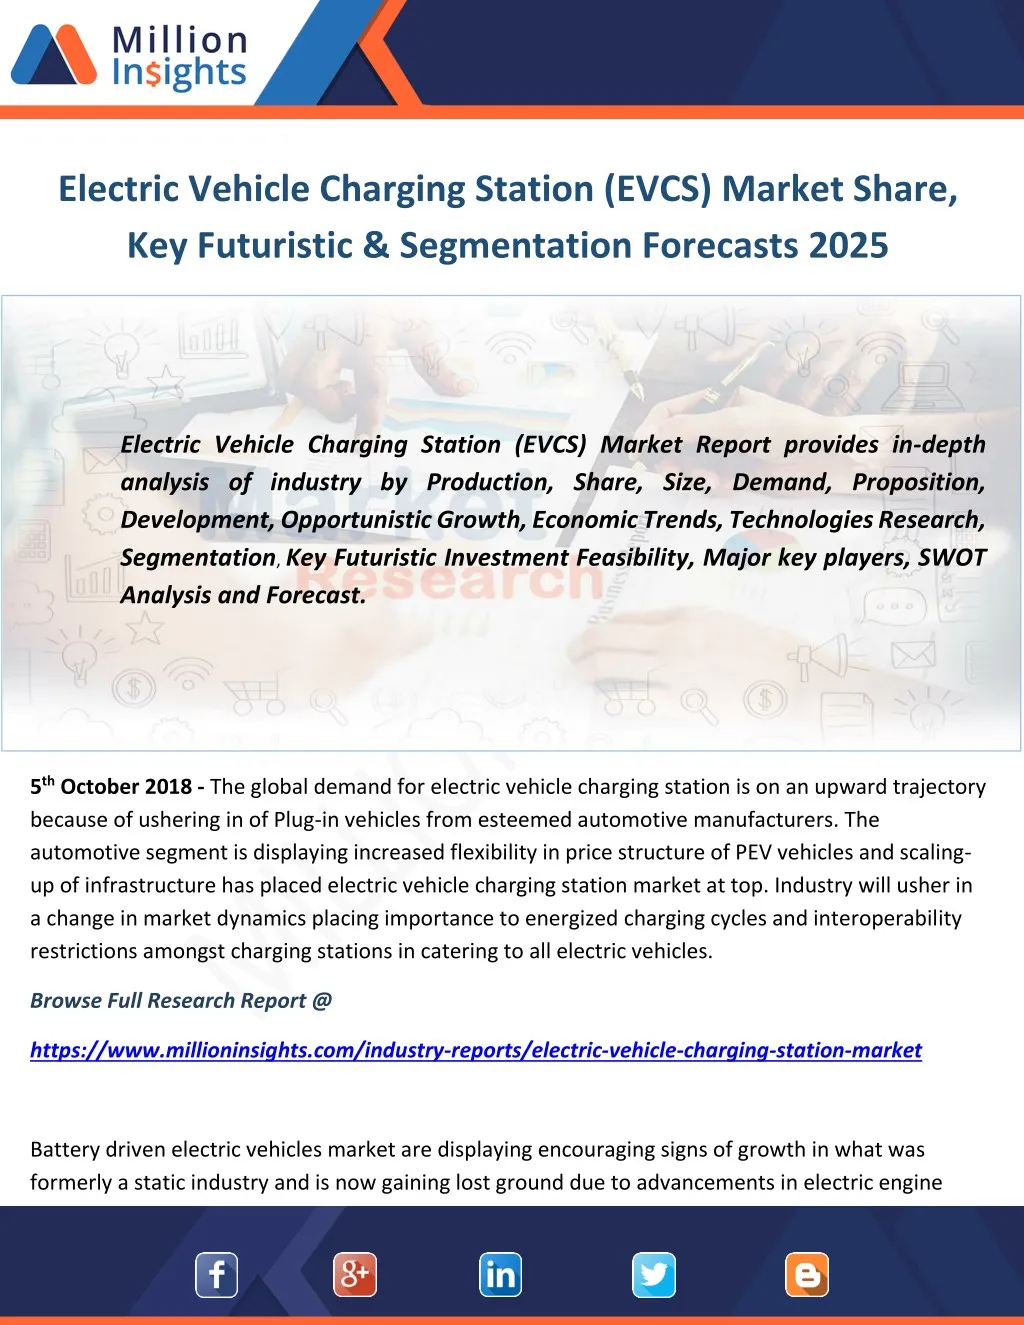 PPT Electric Vehicle Charging Station (EVCS) Market Share, Key